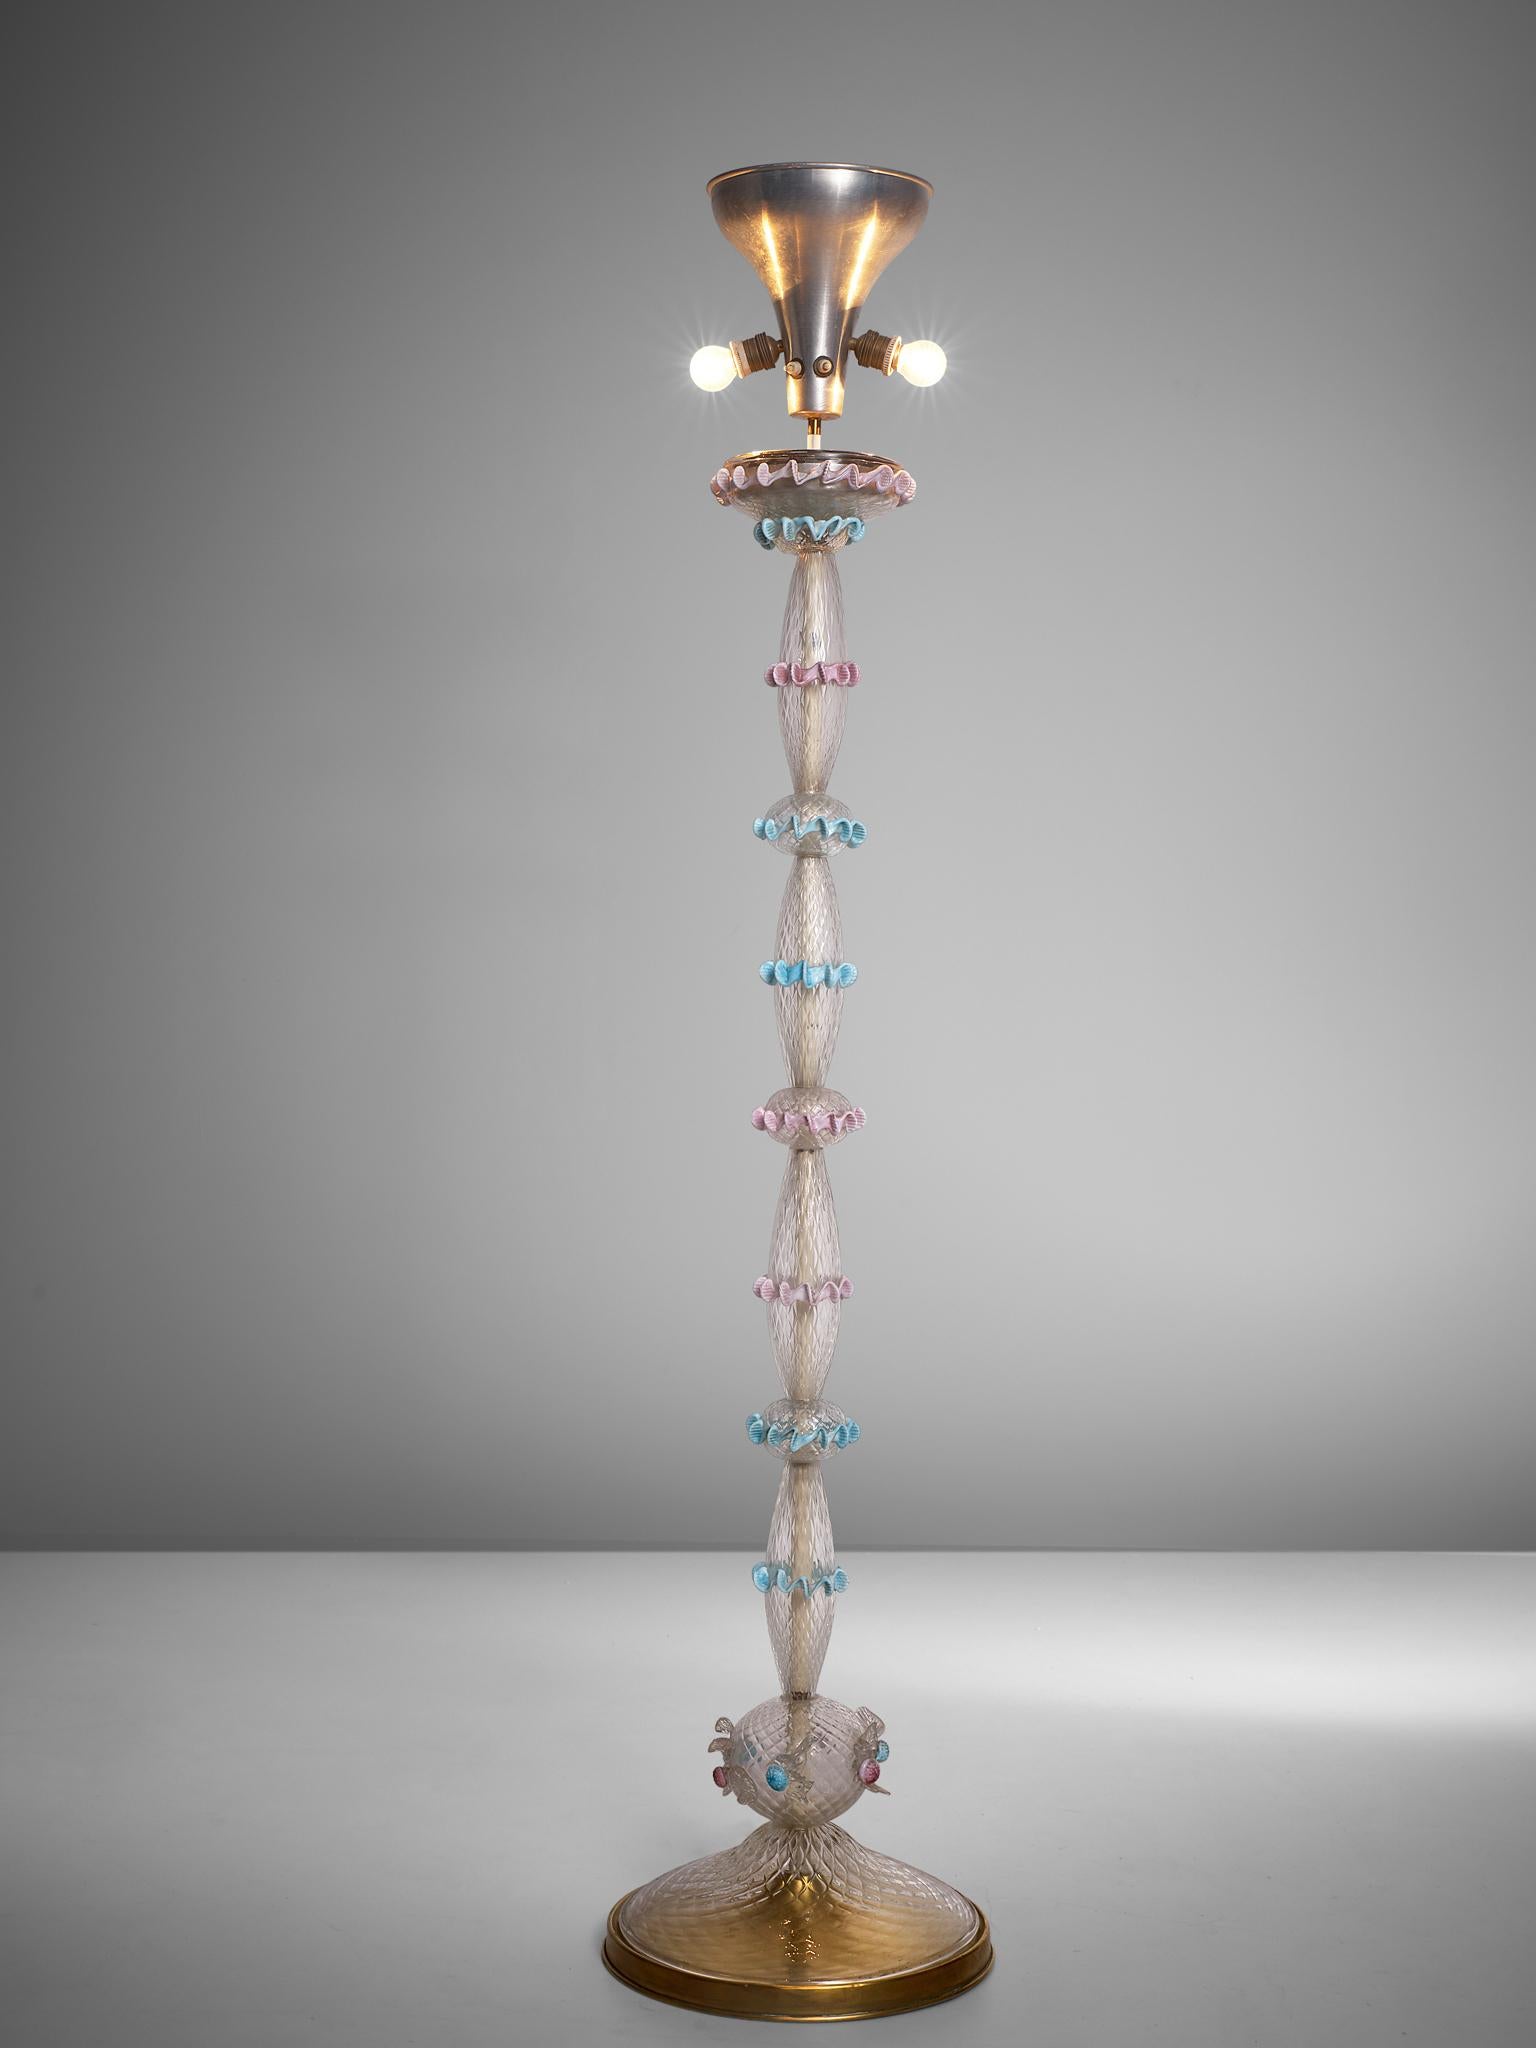 Floor lamp, Murano glass and brass, Italy, 1950s-1960s.

Handcrafted Midcentury floor lamp in clear Murano glass, decorated with several pastel colored, glass wrinkled ornaments. The clear glass base is build up from hourglass shaped elements that